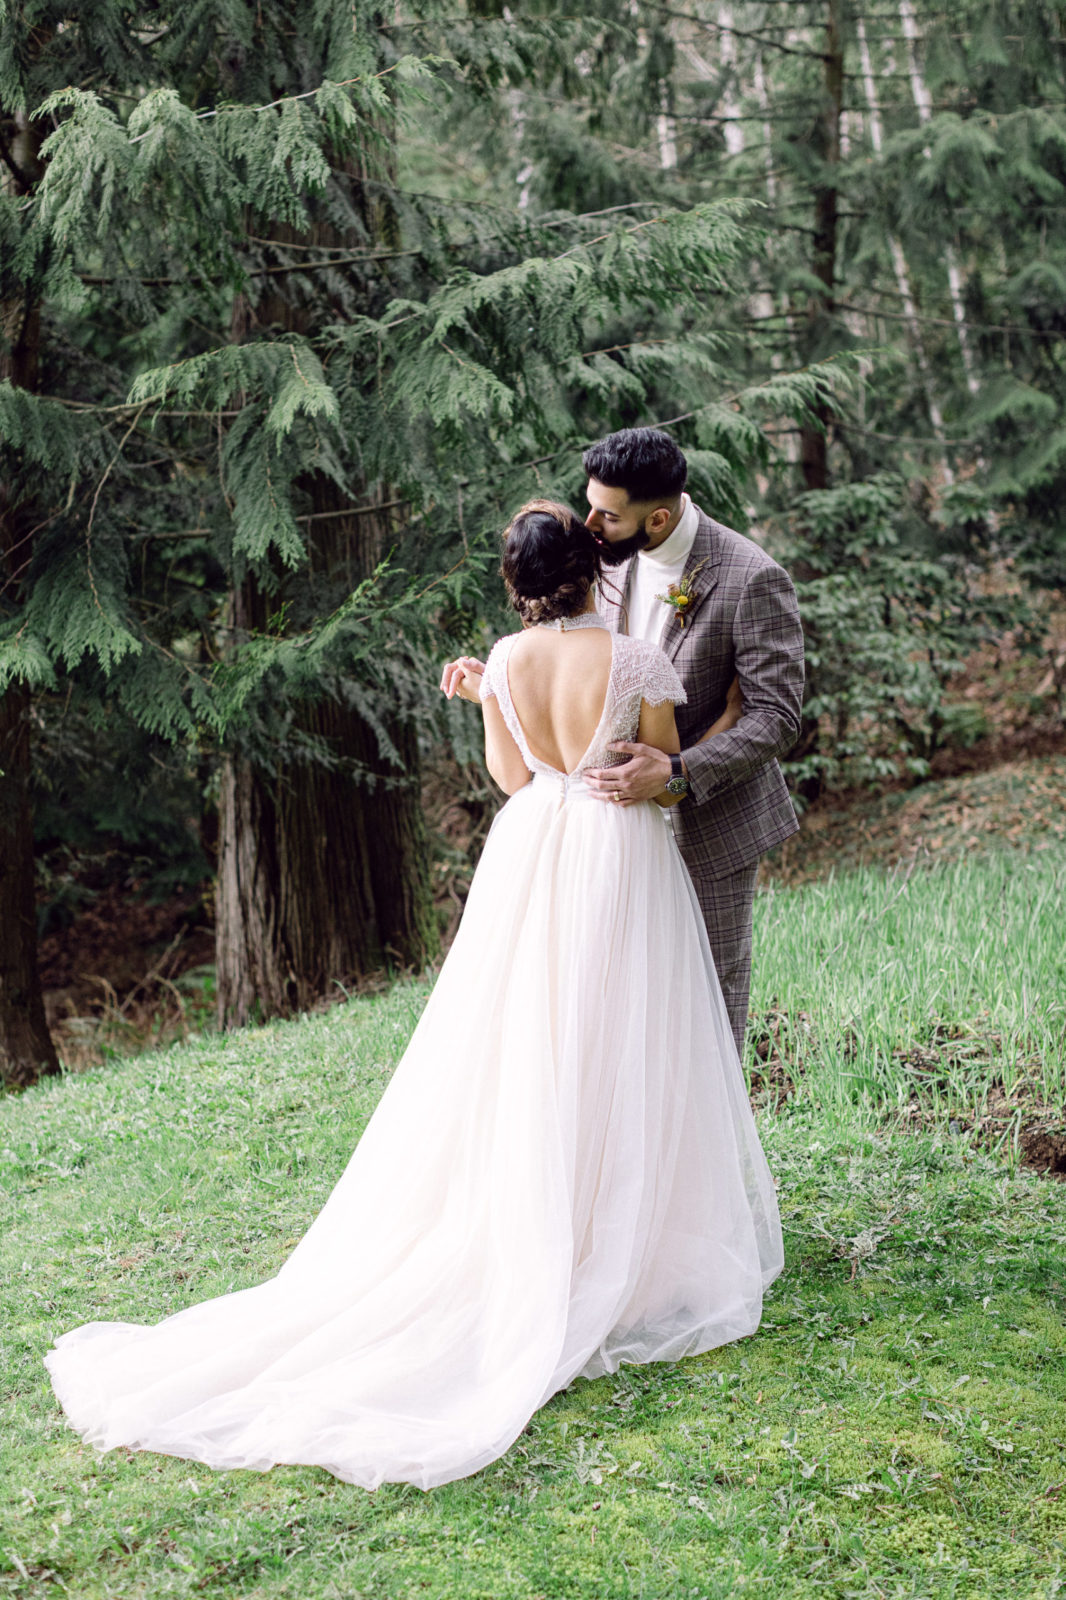 location: Abbotsford BC, whimsical, outdoor green wedding portraits, vintage meets modern, fall wedding inspiration,